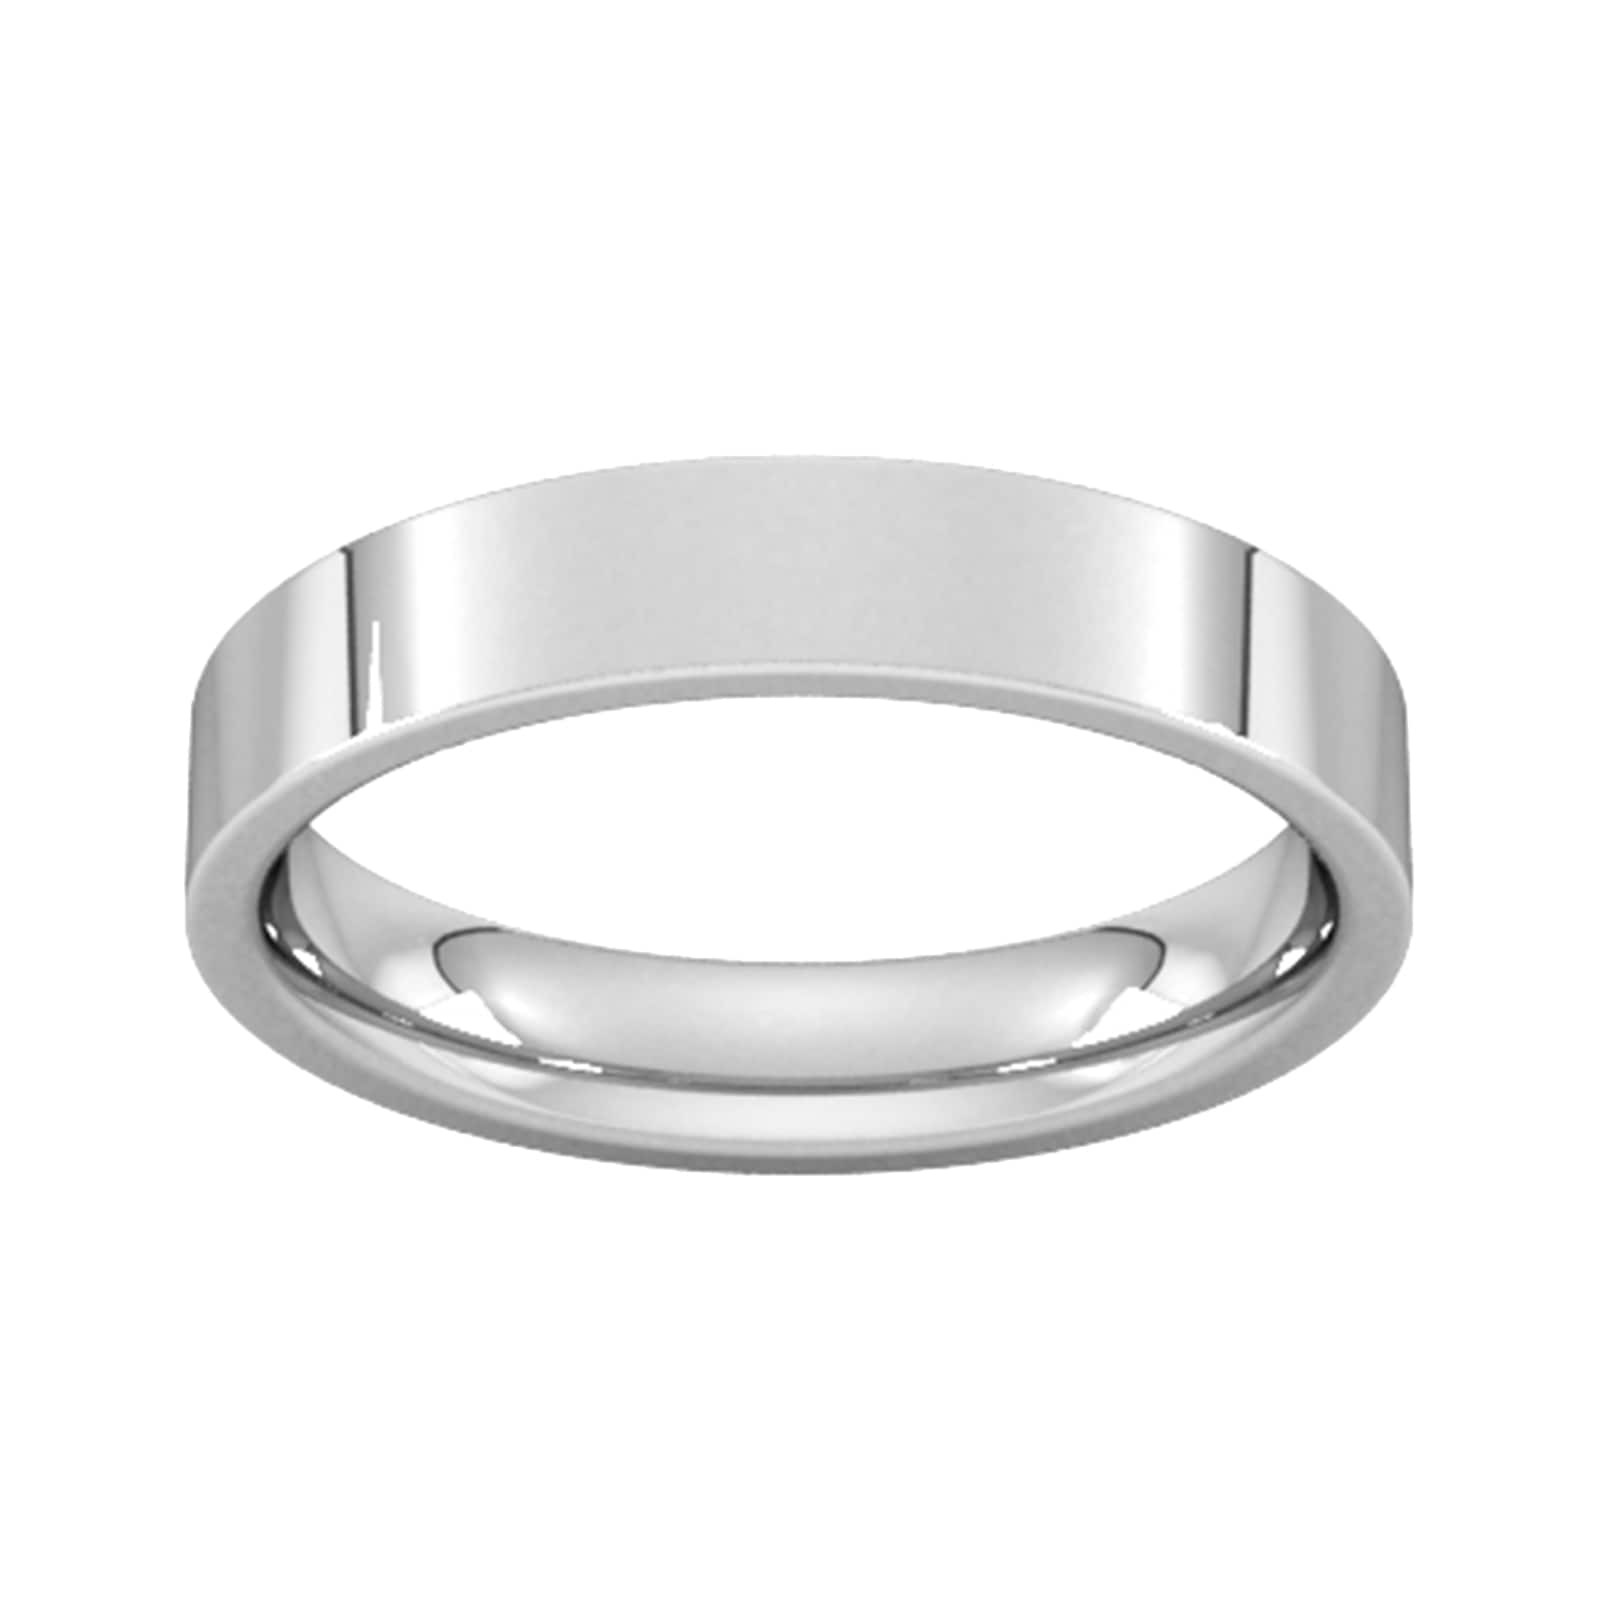 4mm Flat Court Heavy Wedding Ring In 18 Carat White Gold - Ring Size O